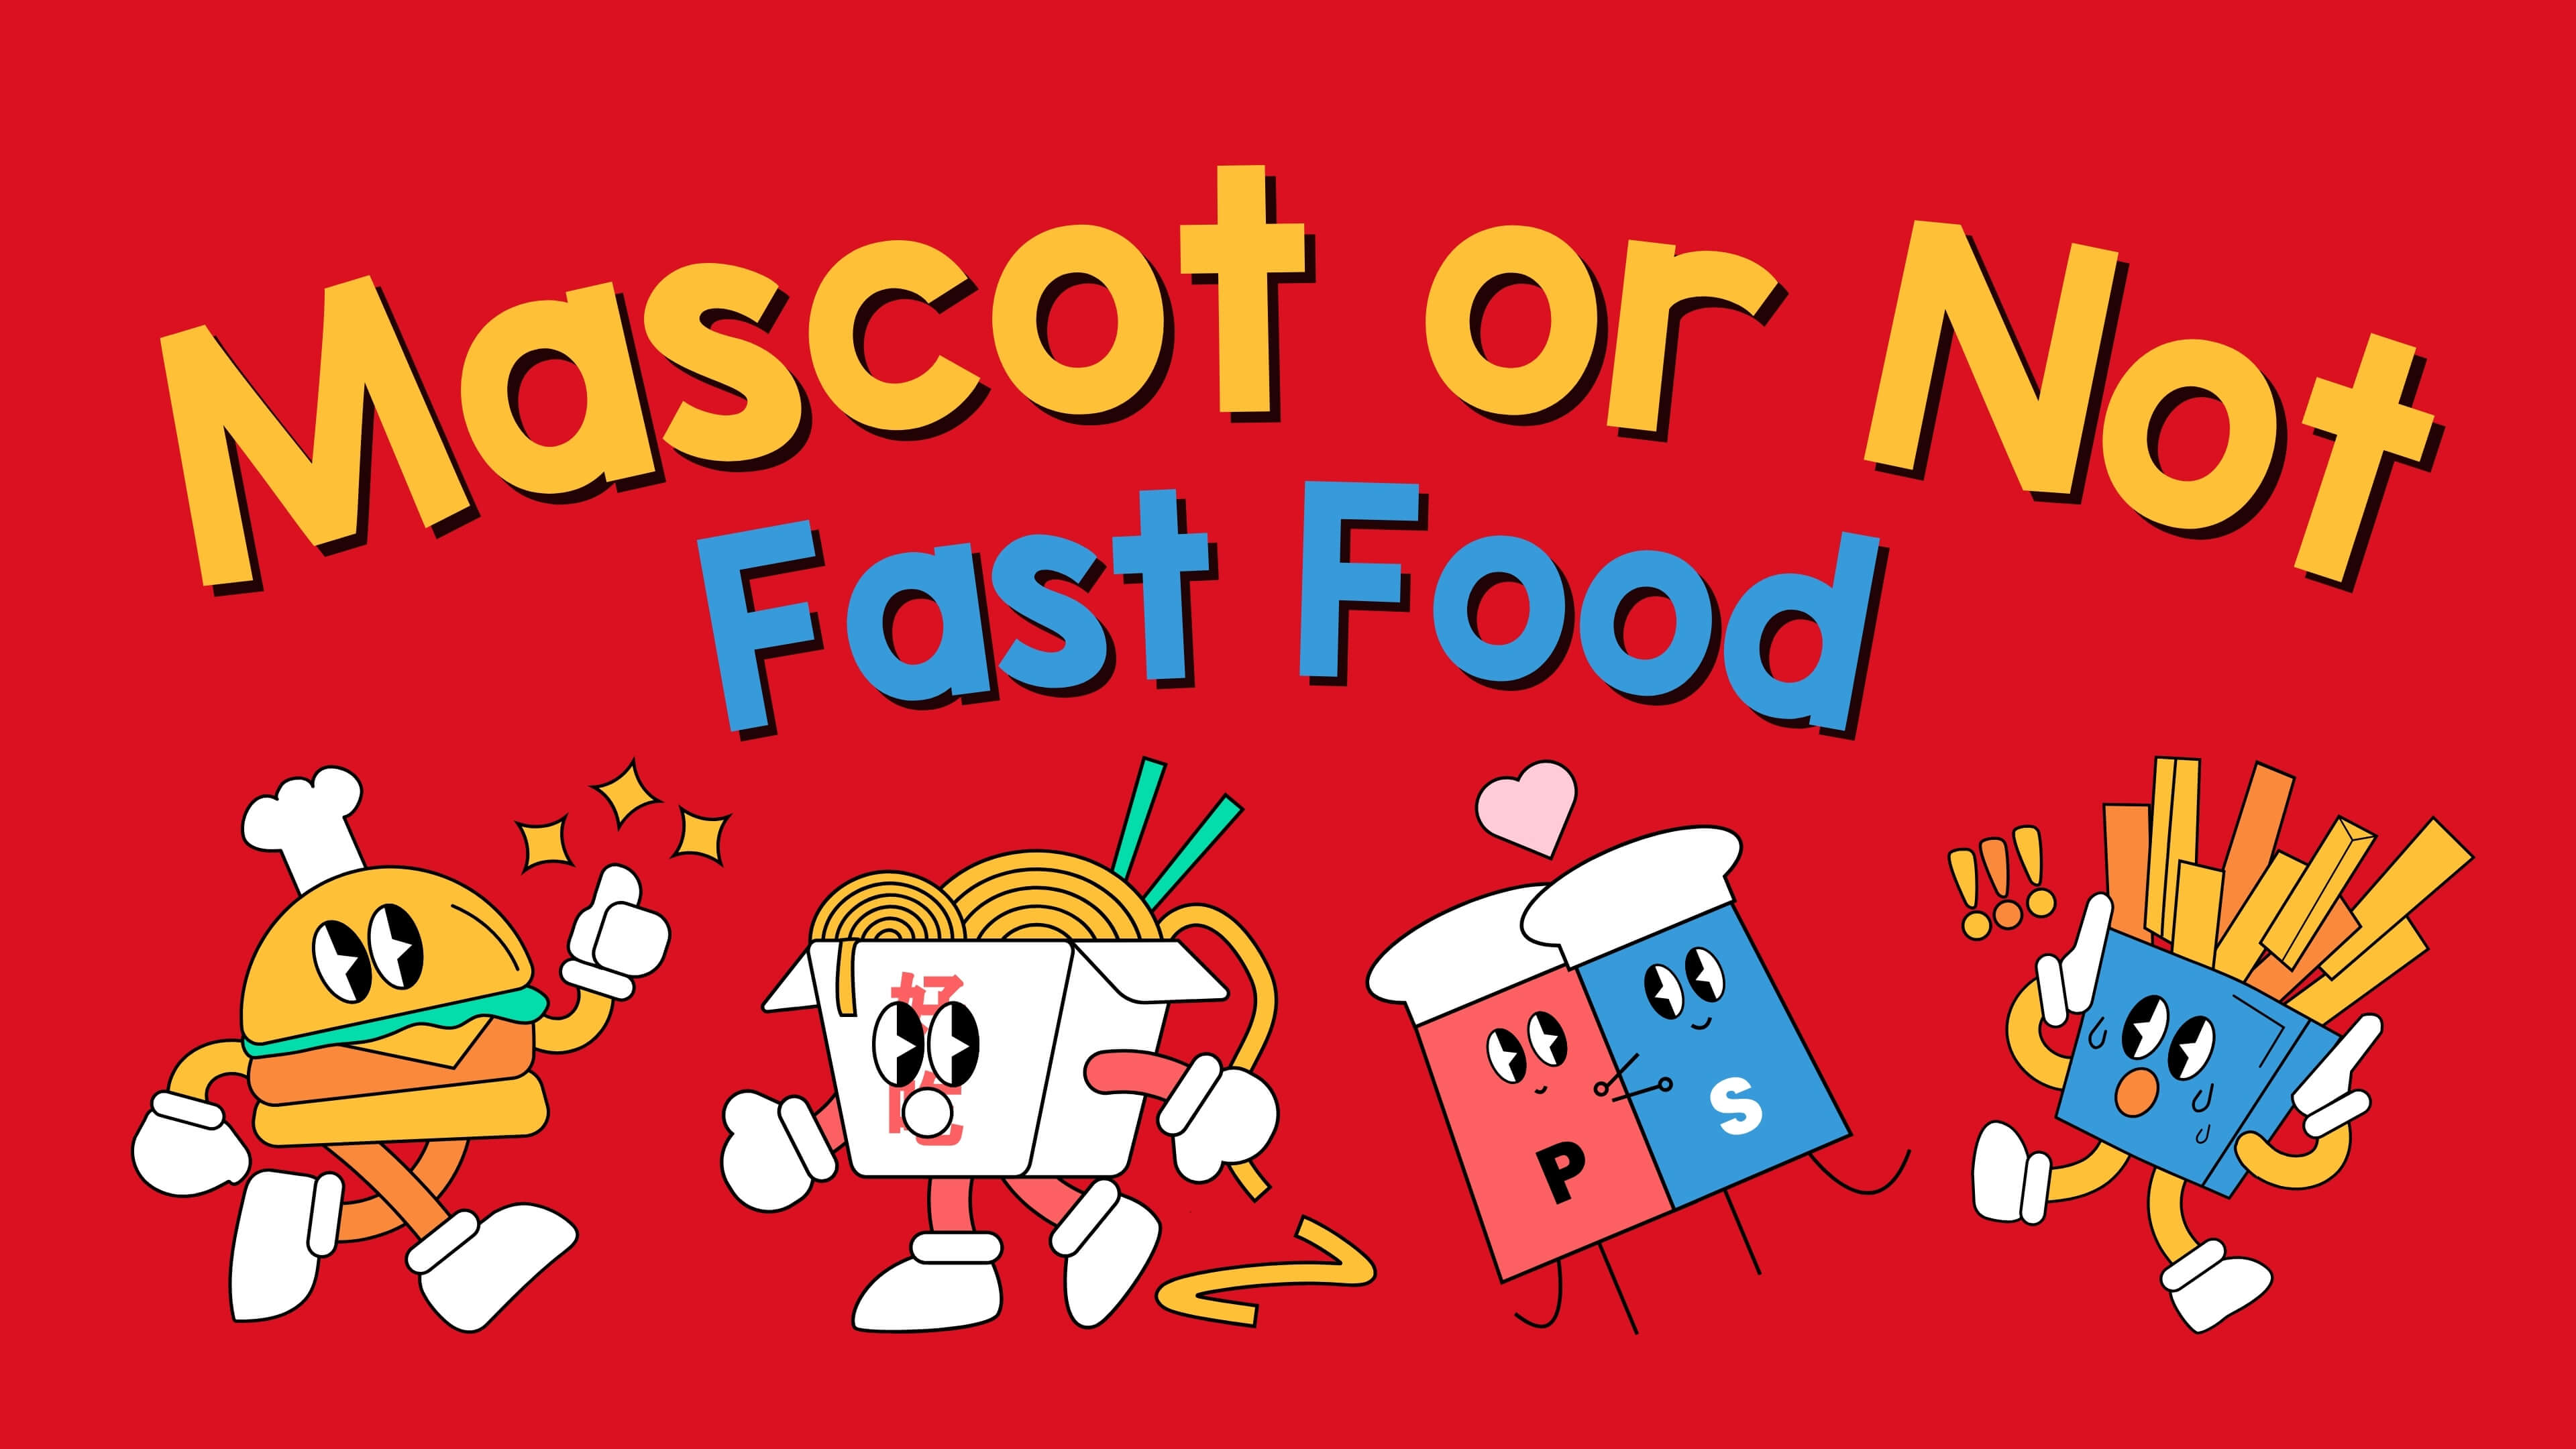 Mascot or Not: Fast Food